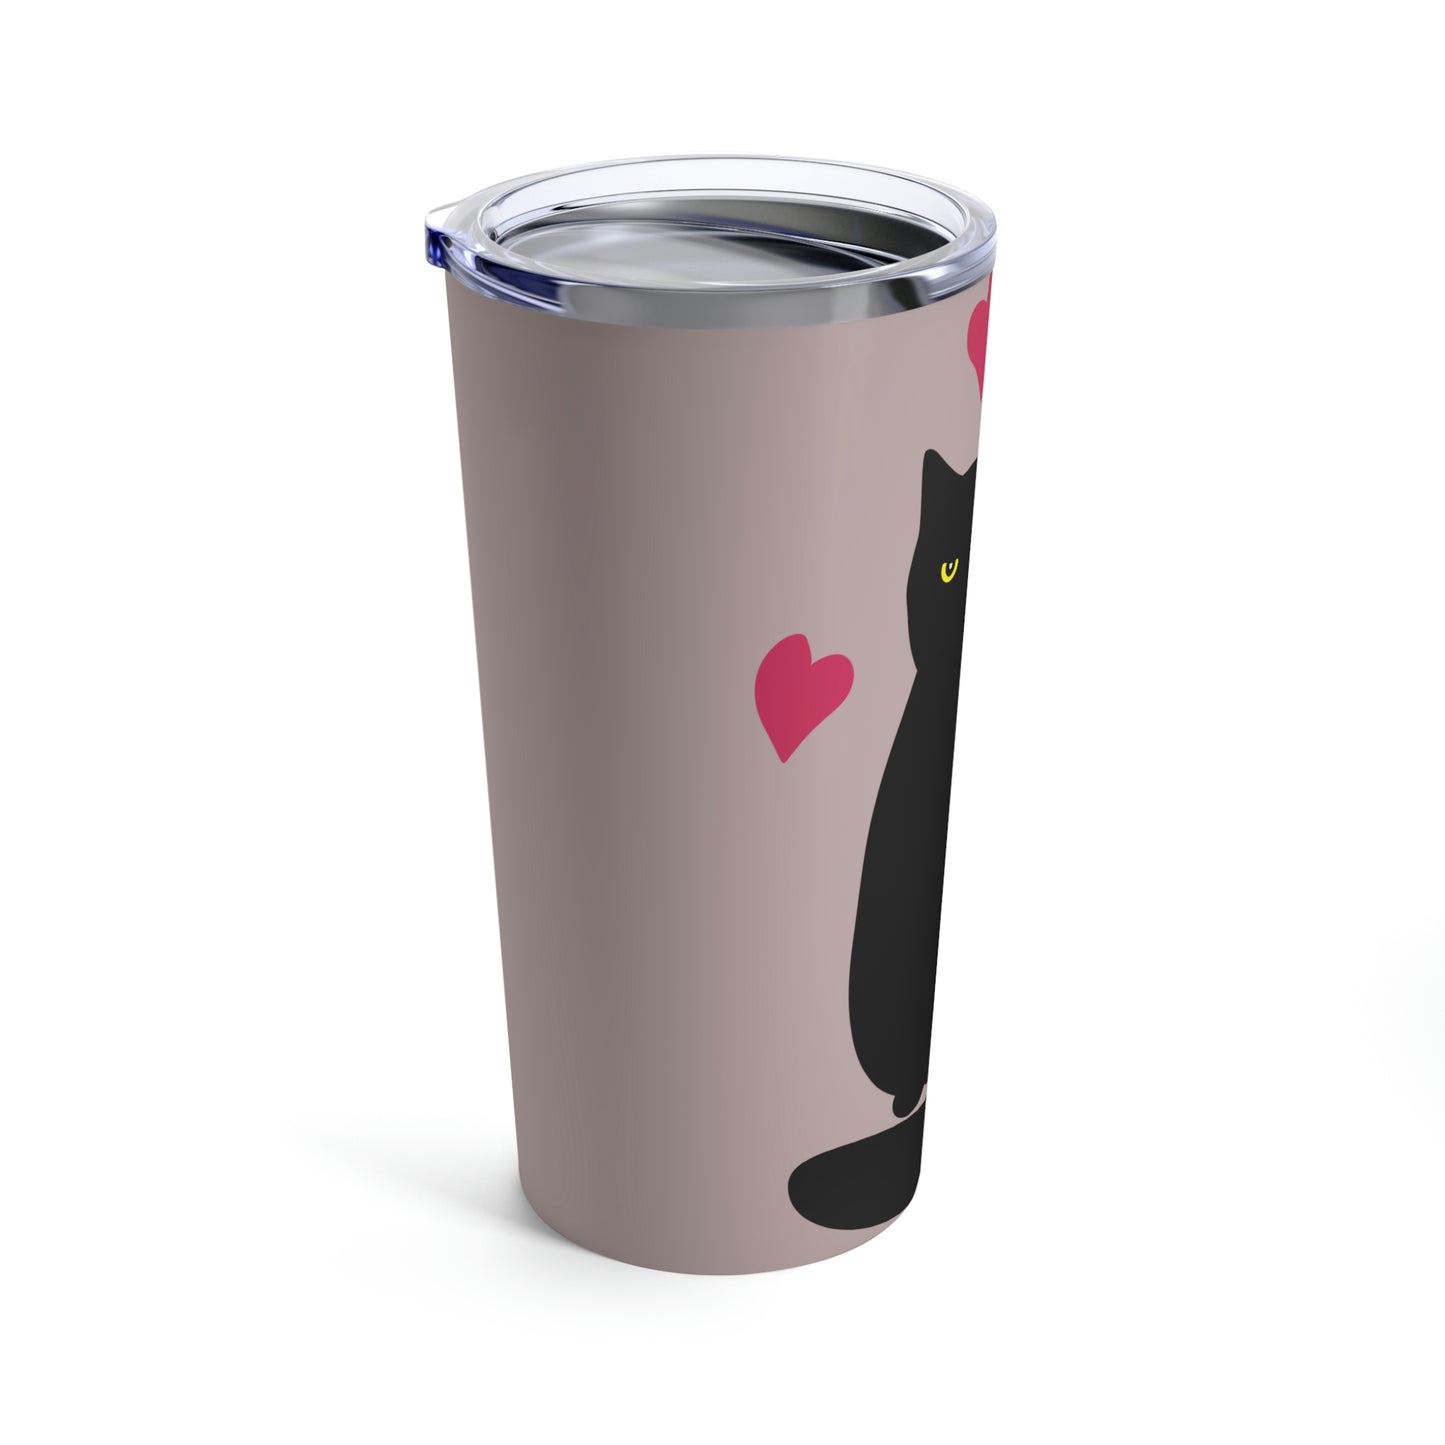 Black Cat with Heart Love Stainless Steel Hot or Cold Vacuum Tumbler 20oz